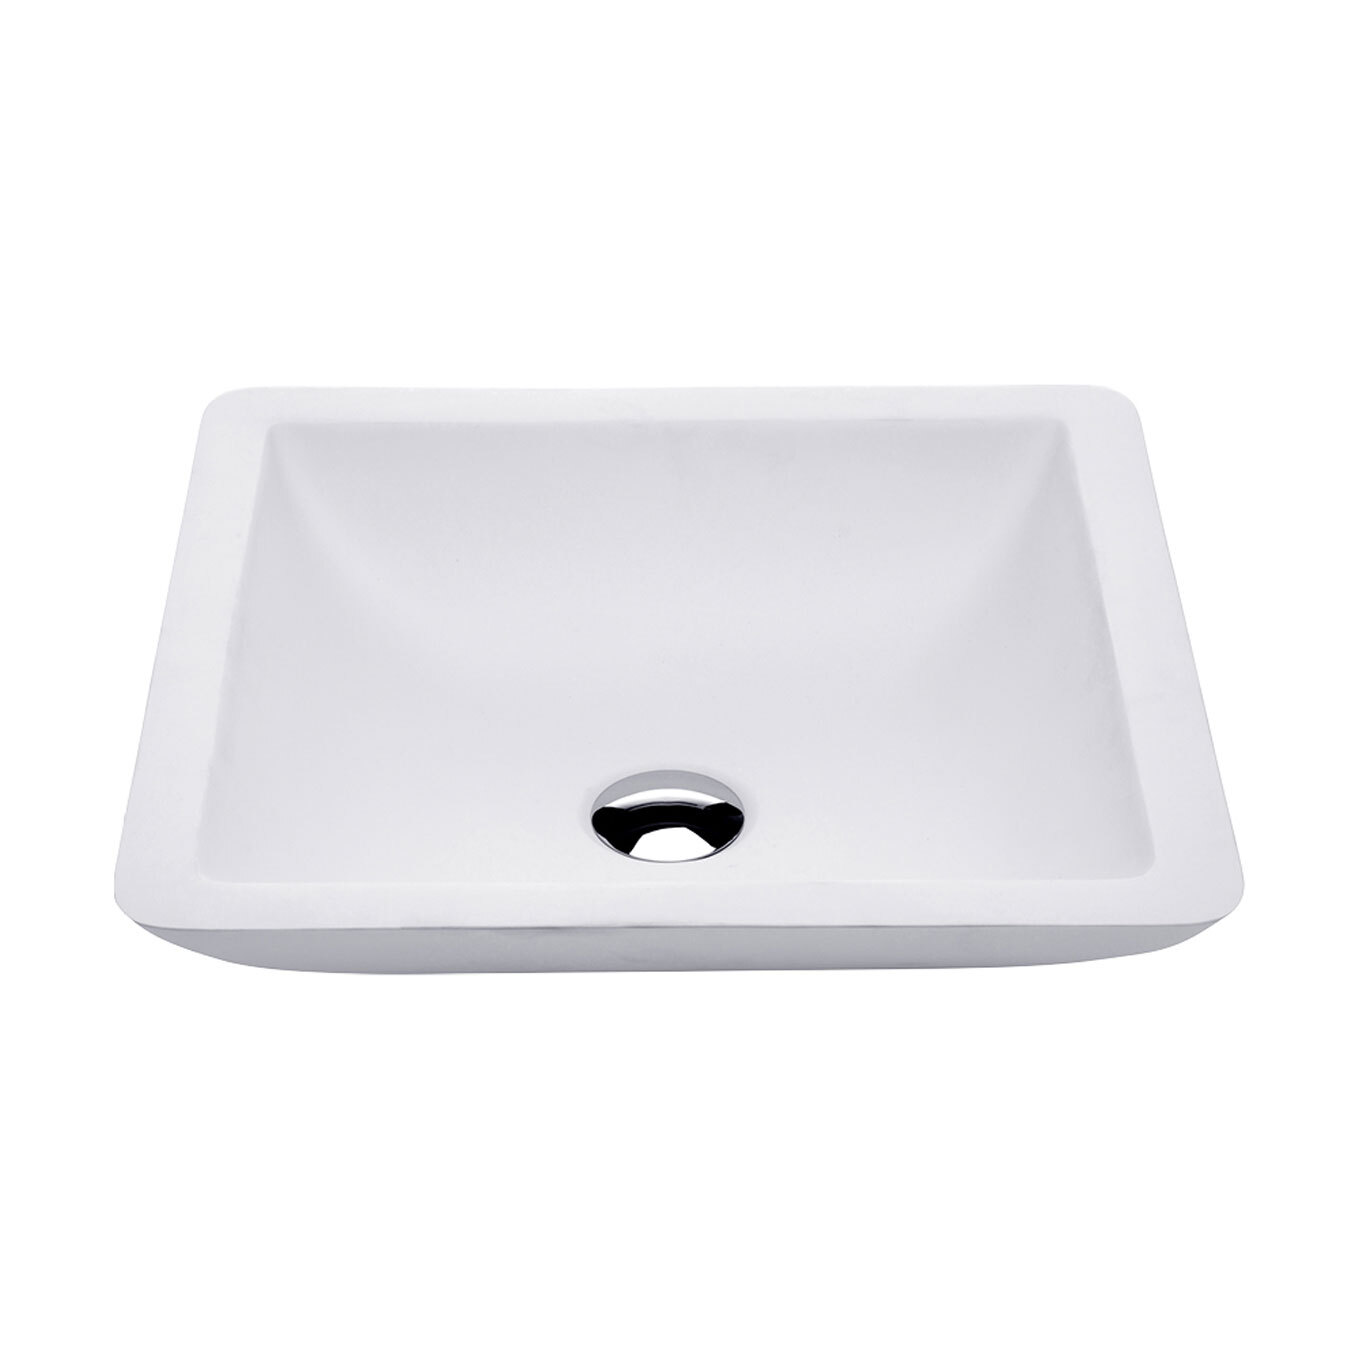 Fienza Classique 420 Cast Stone Solid Surface Above Counter Basin Matte White No Tap Hole 420mm x 420mm CSB02